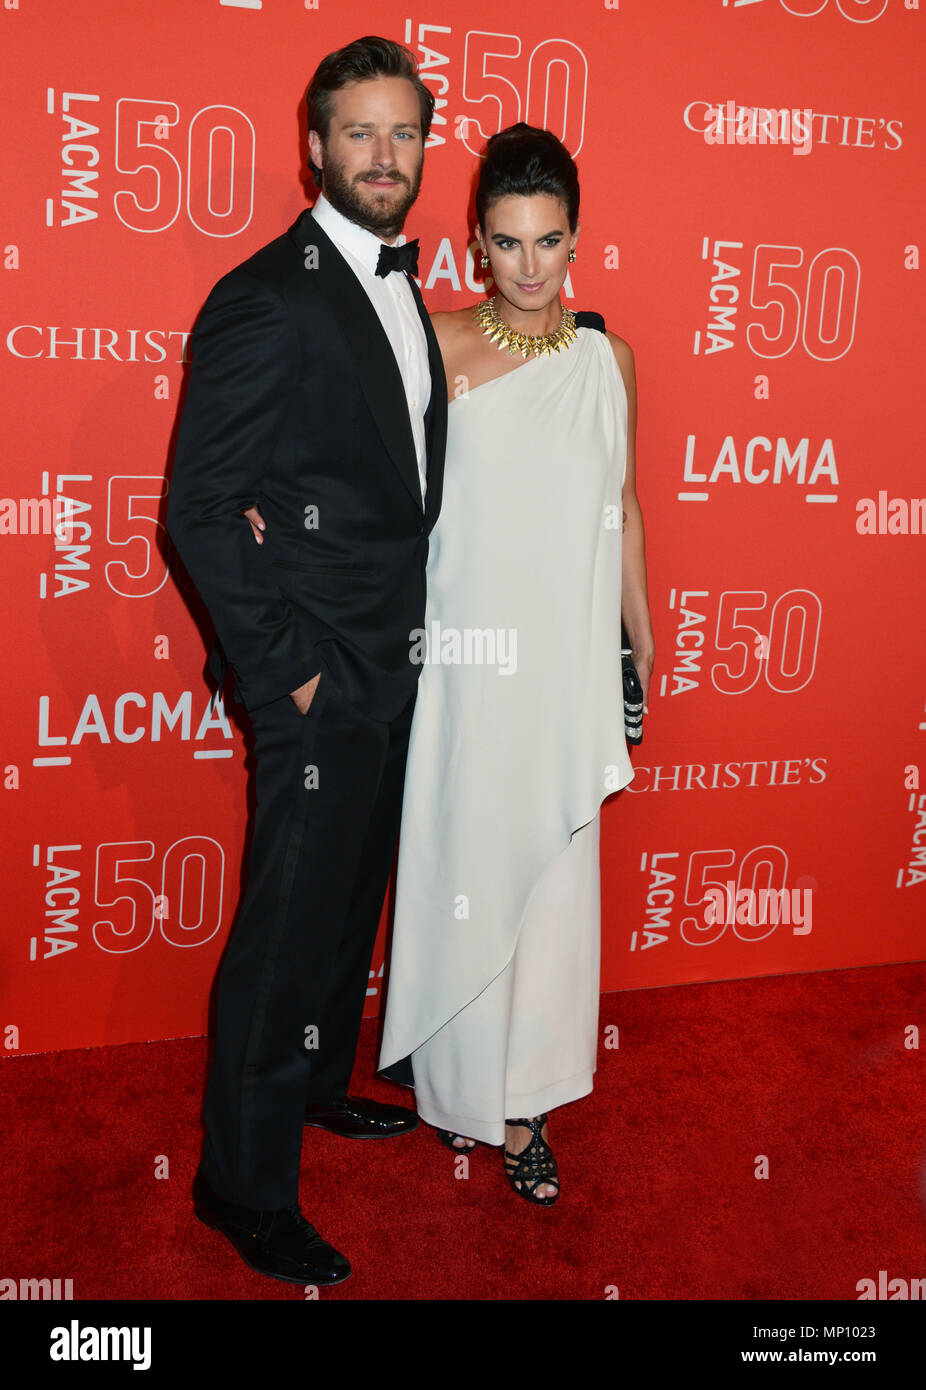 Armie Hammer and Wife Elizabeth Chambers 052 at the  LACMA 50th Ann. Gala 2015 at the LACMA Museum in Los Angeles. April 18, 2015.Armie Hammer and Wife Elizabeth Chambers 052 ------------- Red Carpet Event, Vertical, USA, Film Industry, Celebrities,  Photography, Bestof, Arts Culture and Entertainment, Topix Celebrities fashion /  Vertical, Best of, Event in Hollywood Life - California,  Red Carpet and backstage, USA, Film Industry, Celebrities,  movie celebrities, TV celebrities, Music celebrities, Photography, Bestof, Arts Culture and Entertainment,  Topix, vertical,  family from from the ye Stock Photo